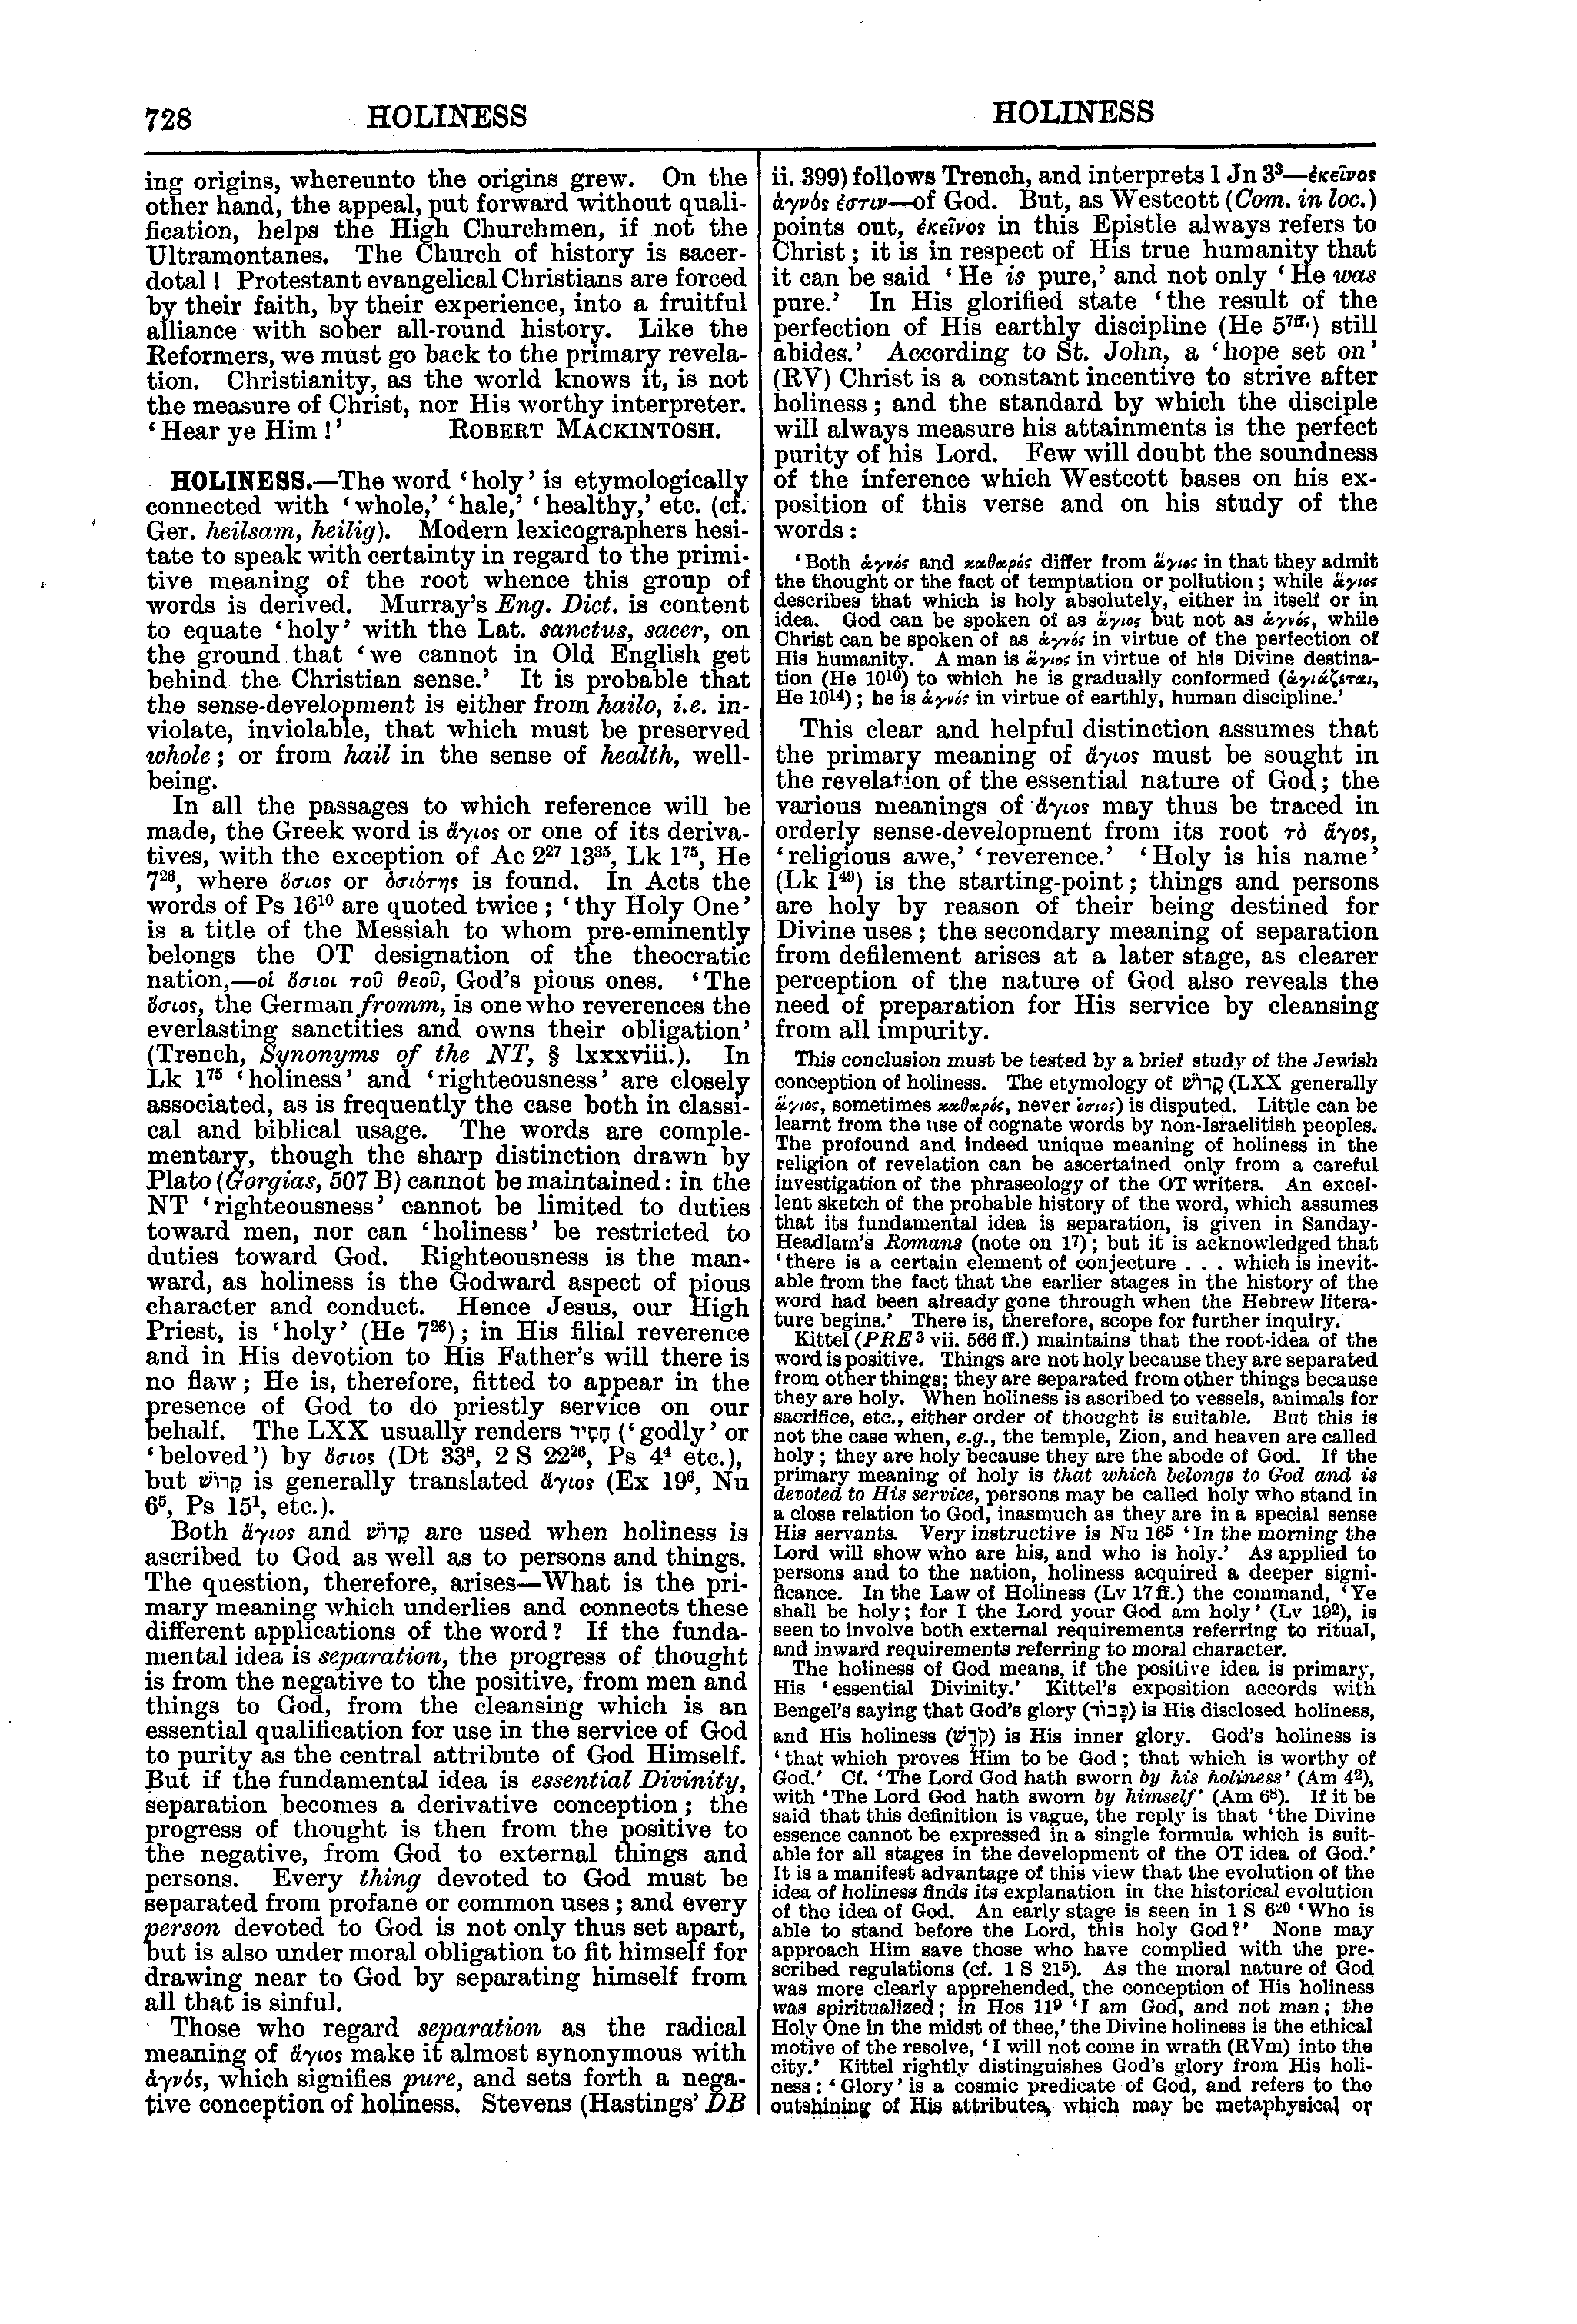 Image of page 728